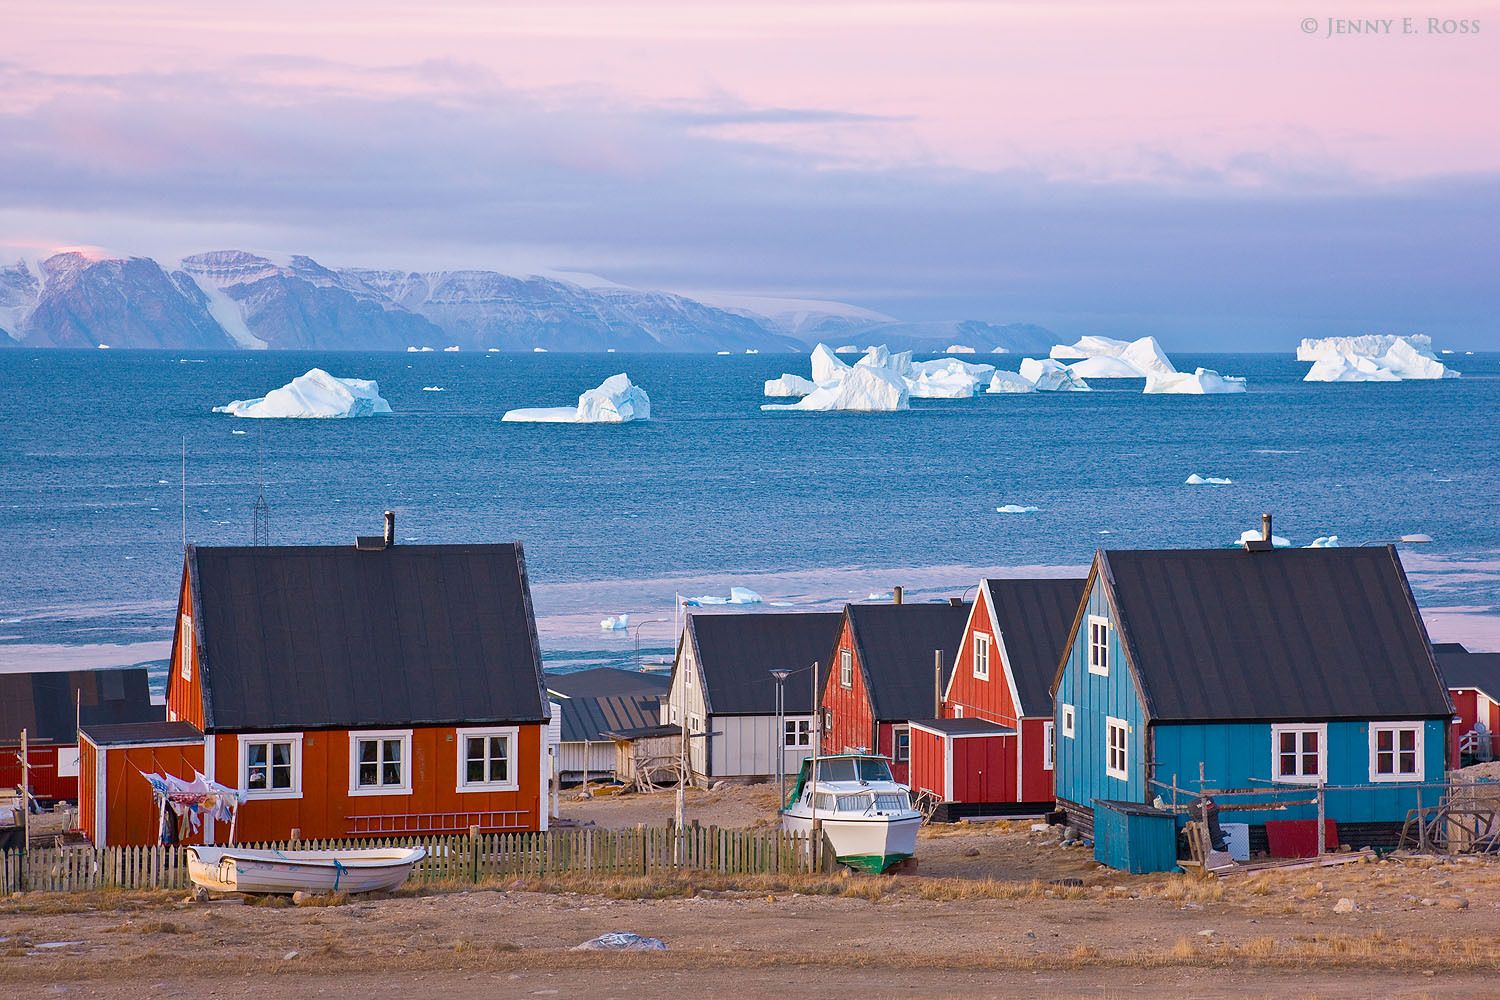 Sunrise in the town of Qaanaaq, at the edge of Murchison Sound in Baffin Bay, Northwest Greenland.